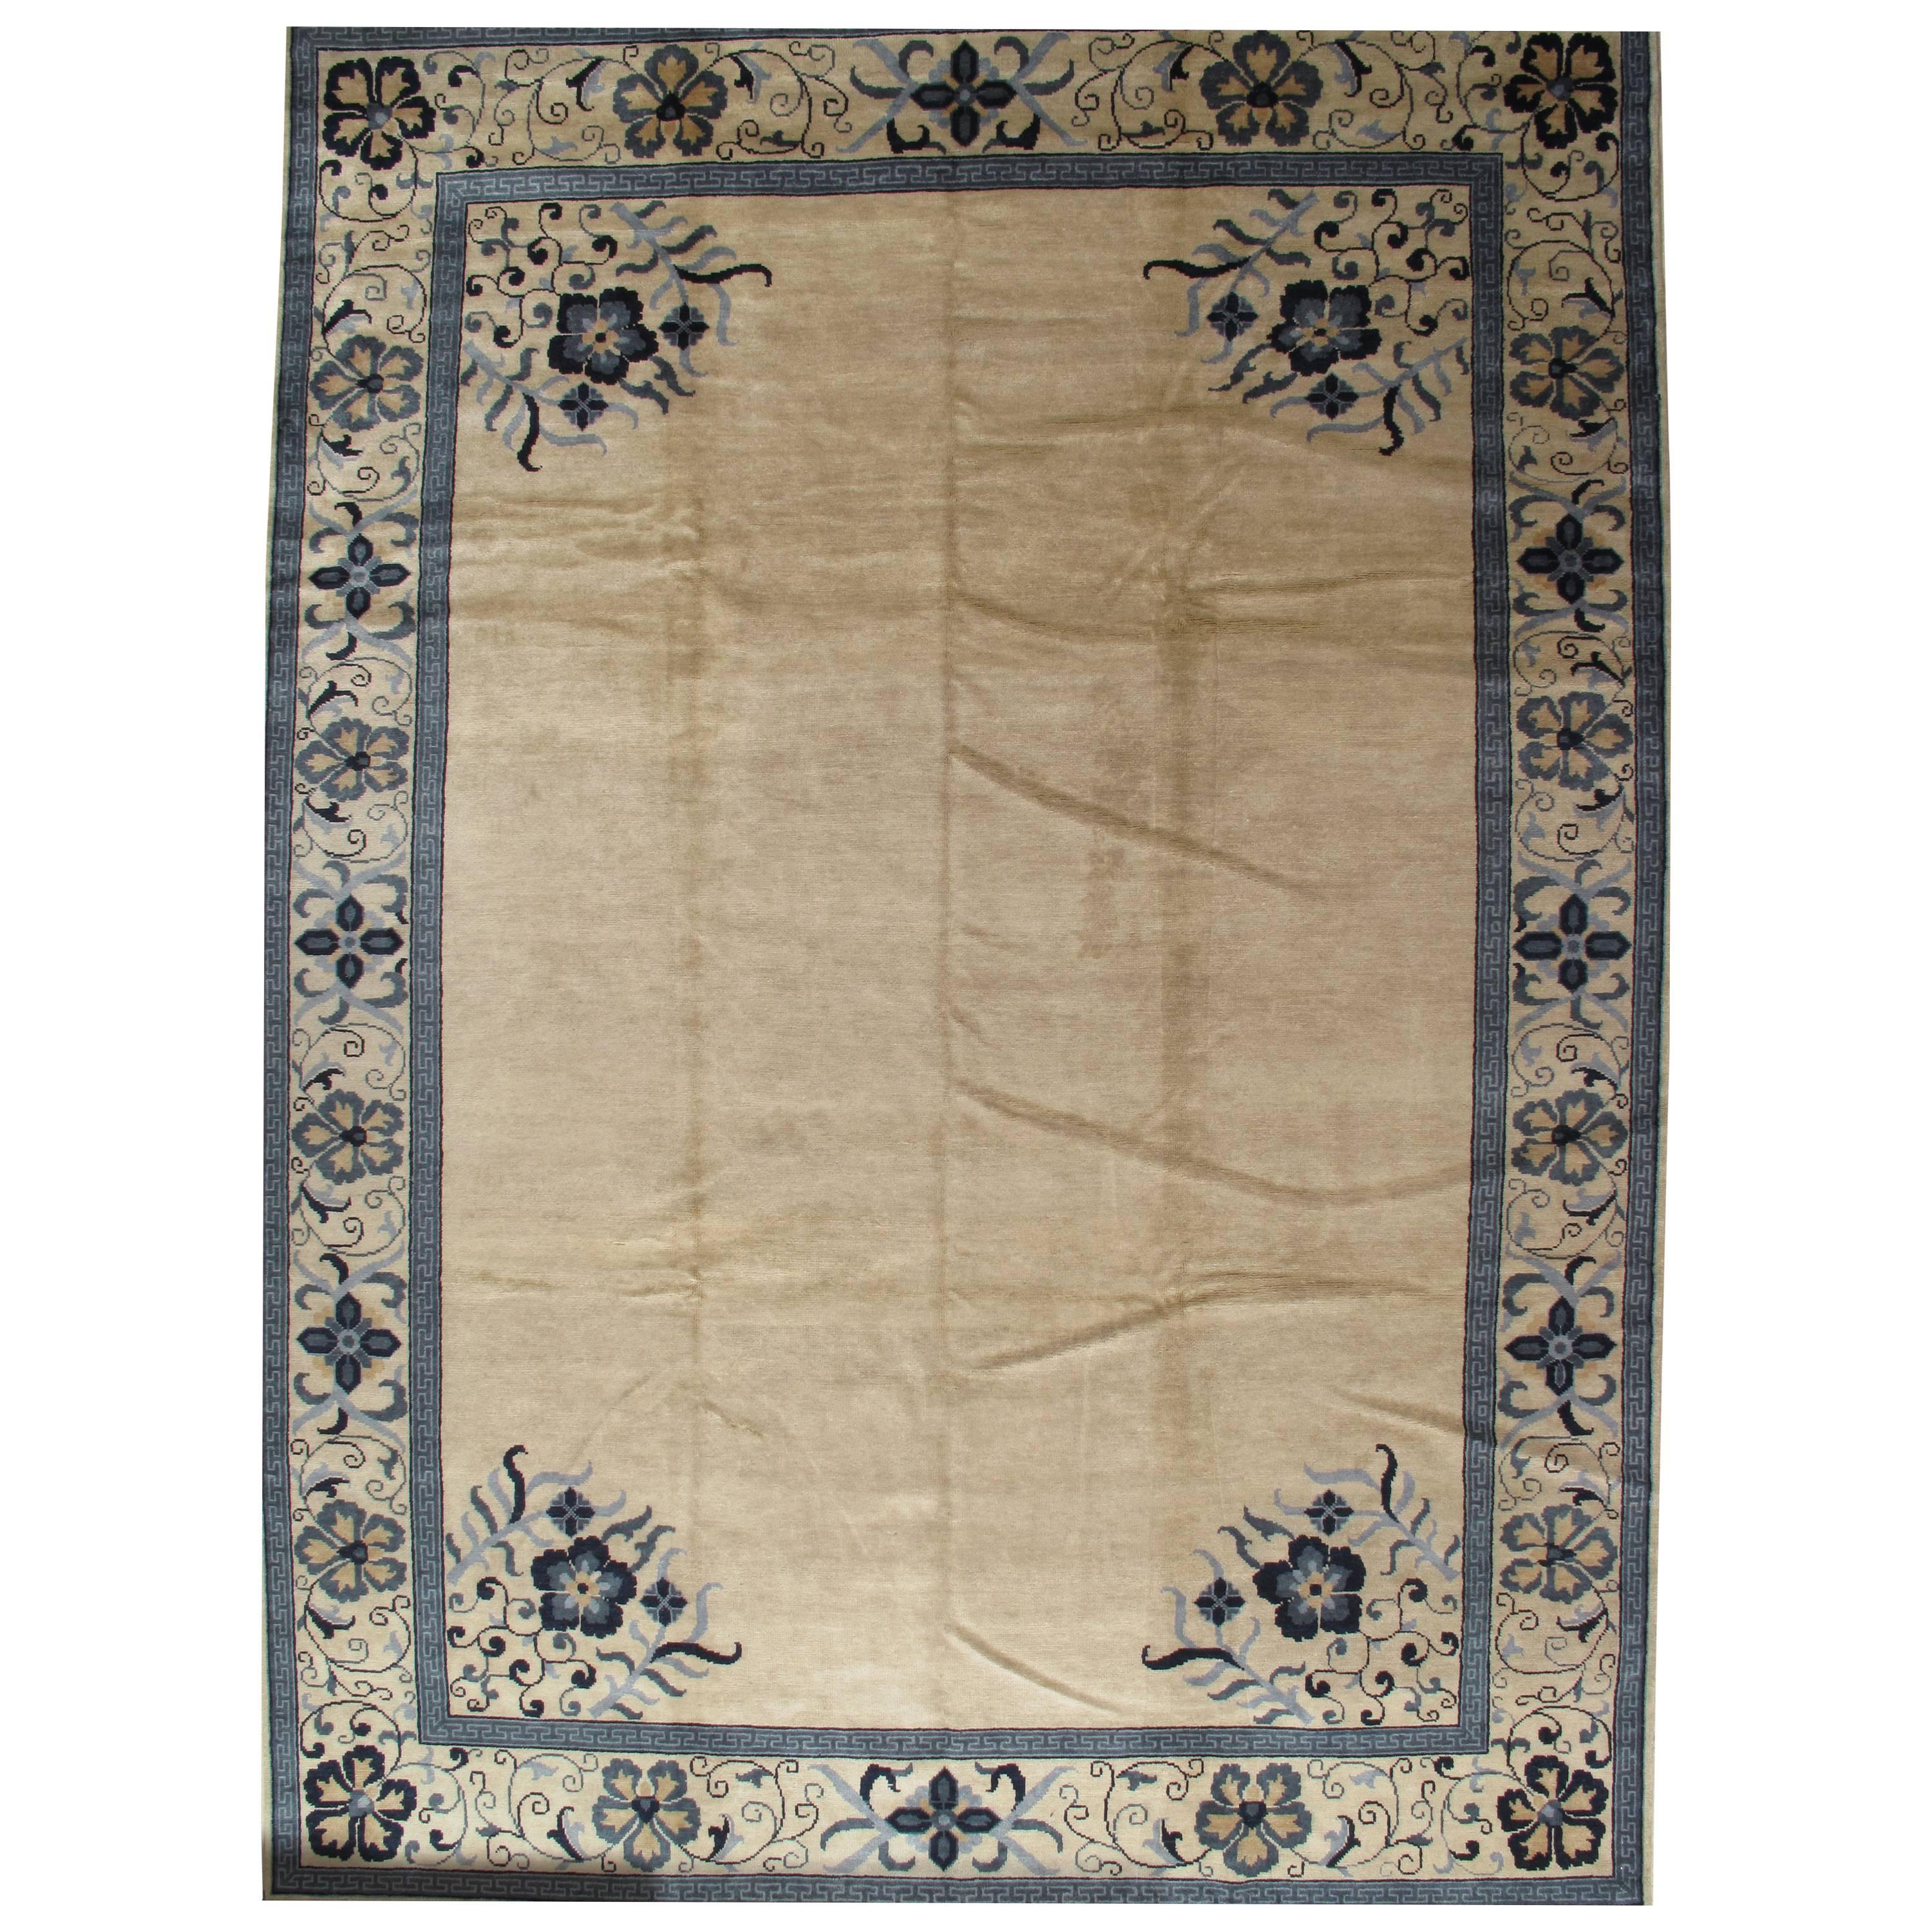 Vintage Chinese Carpet, Tan and Blue Carpet, Handmade Wool Rug For Sale